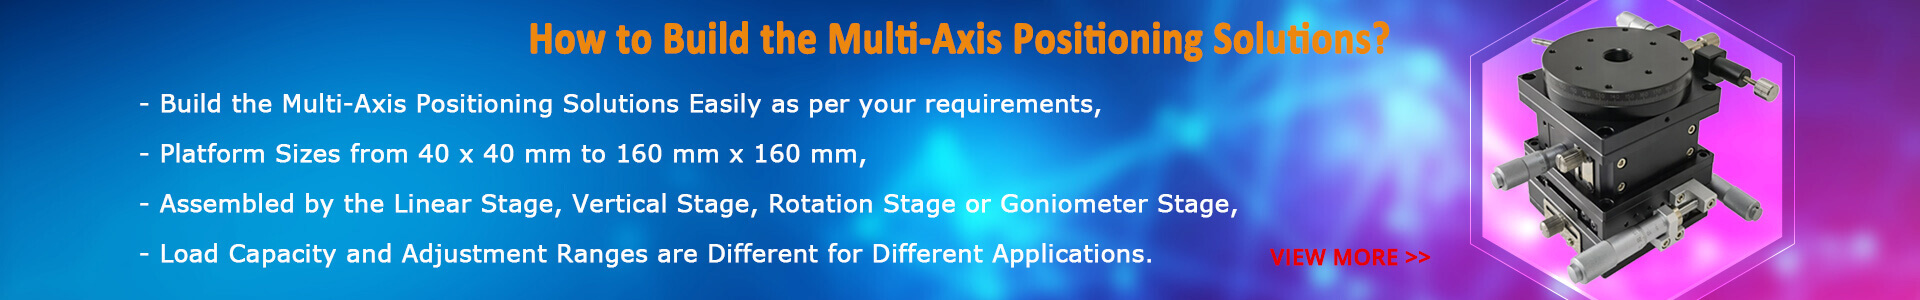 How to Build the Multi-Axis Positioning Solutions?